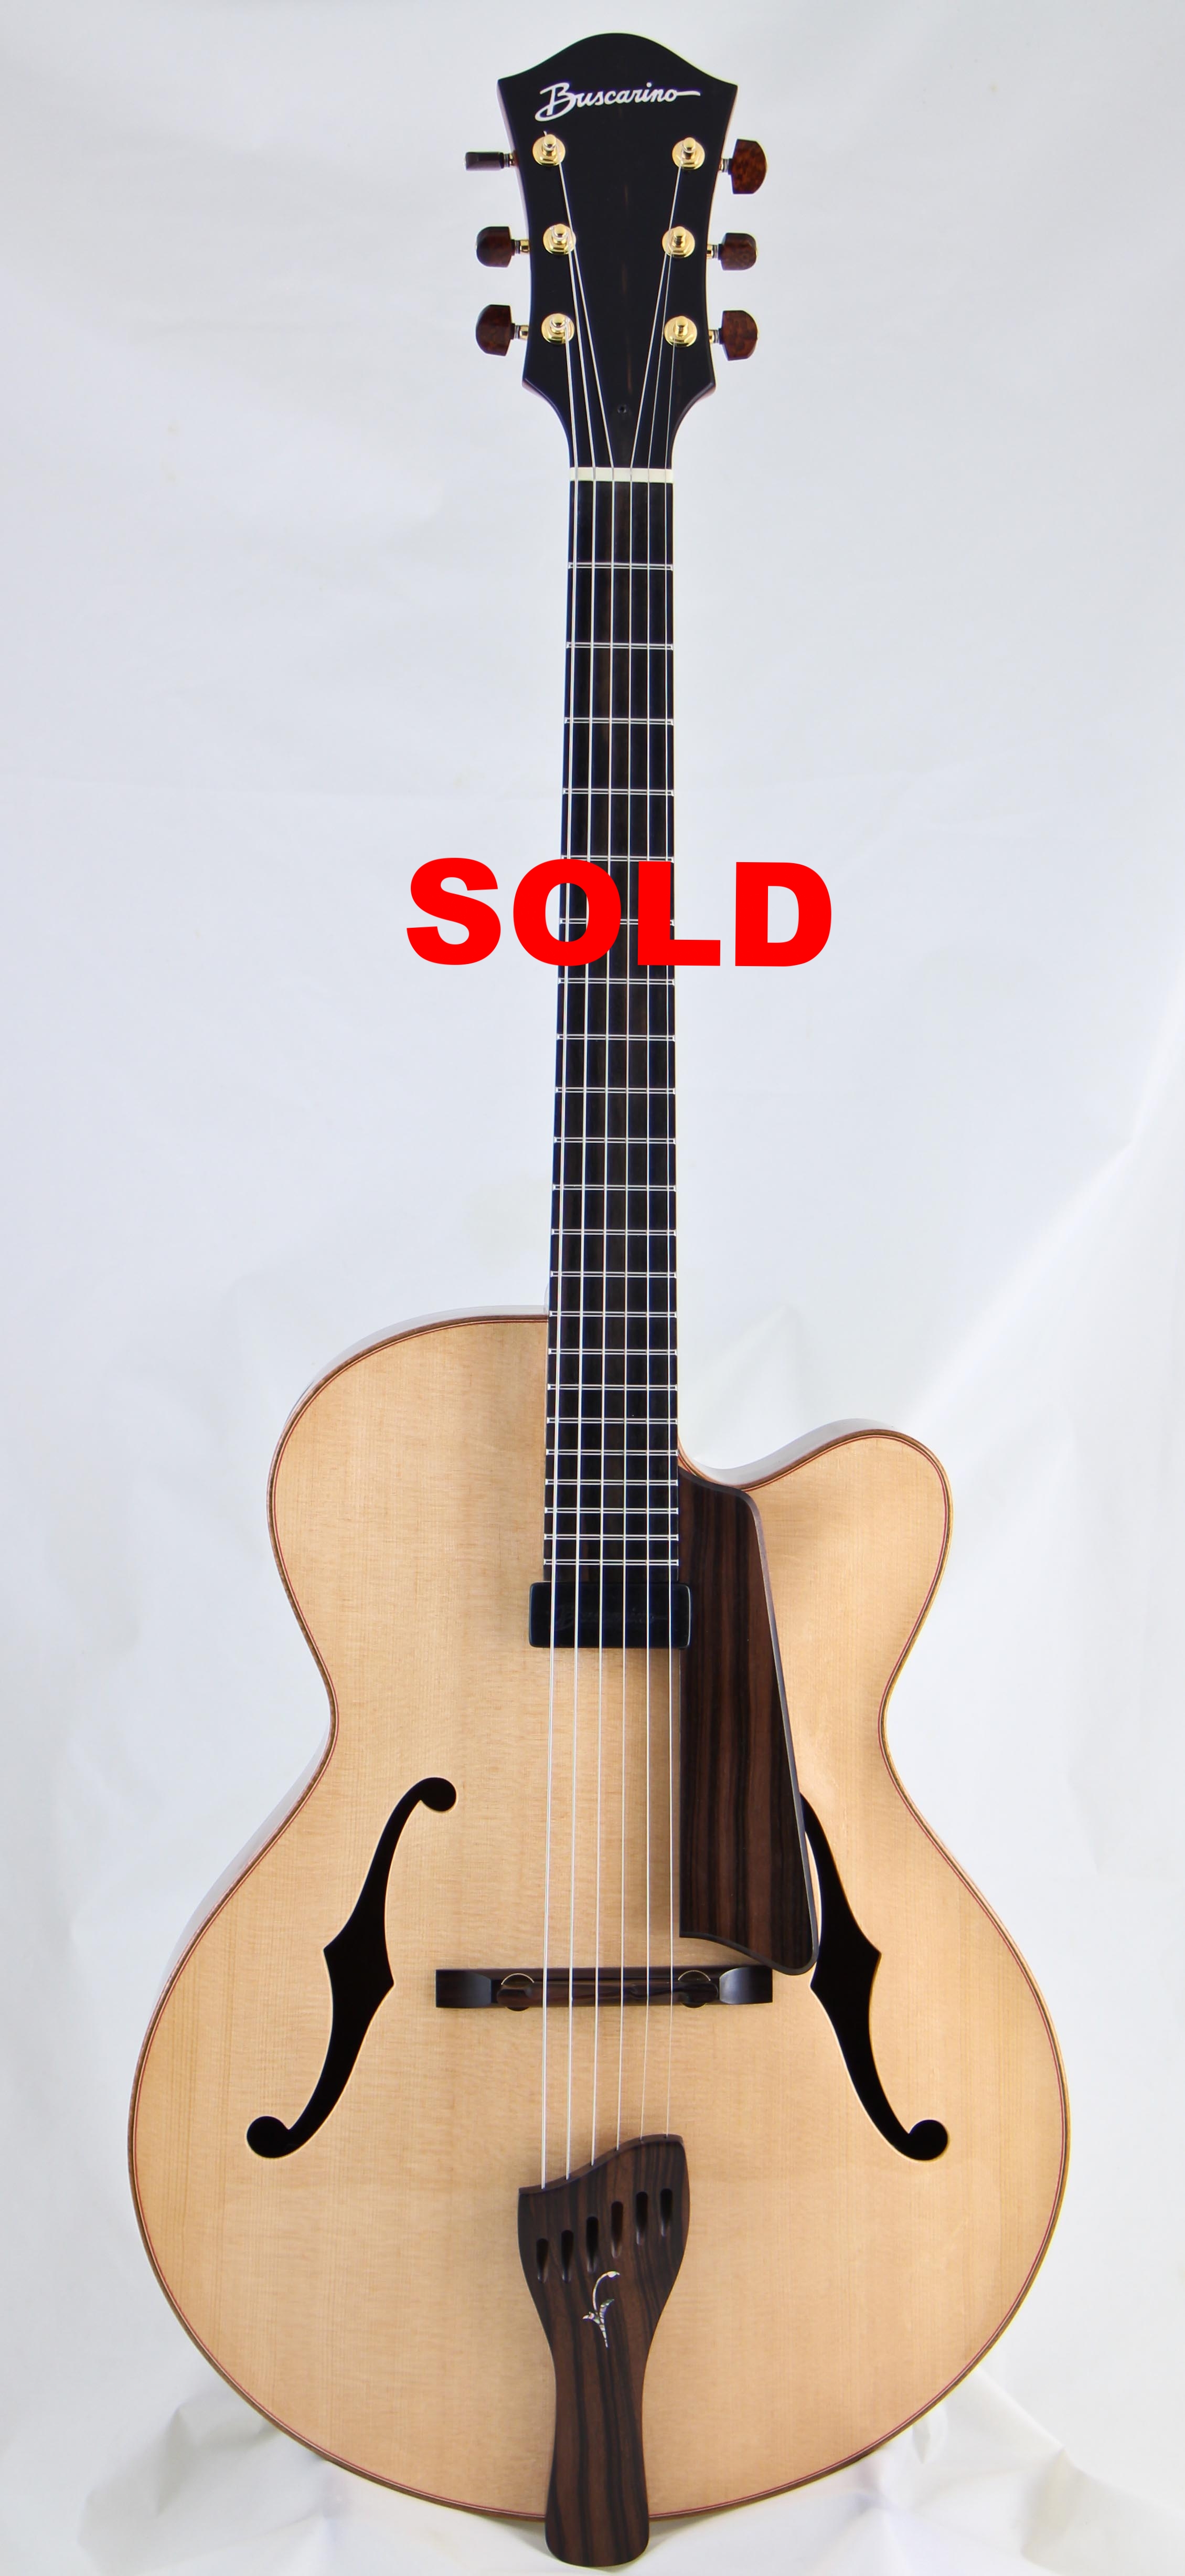 New 16" Artisan Archtop